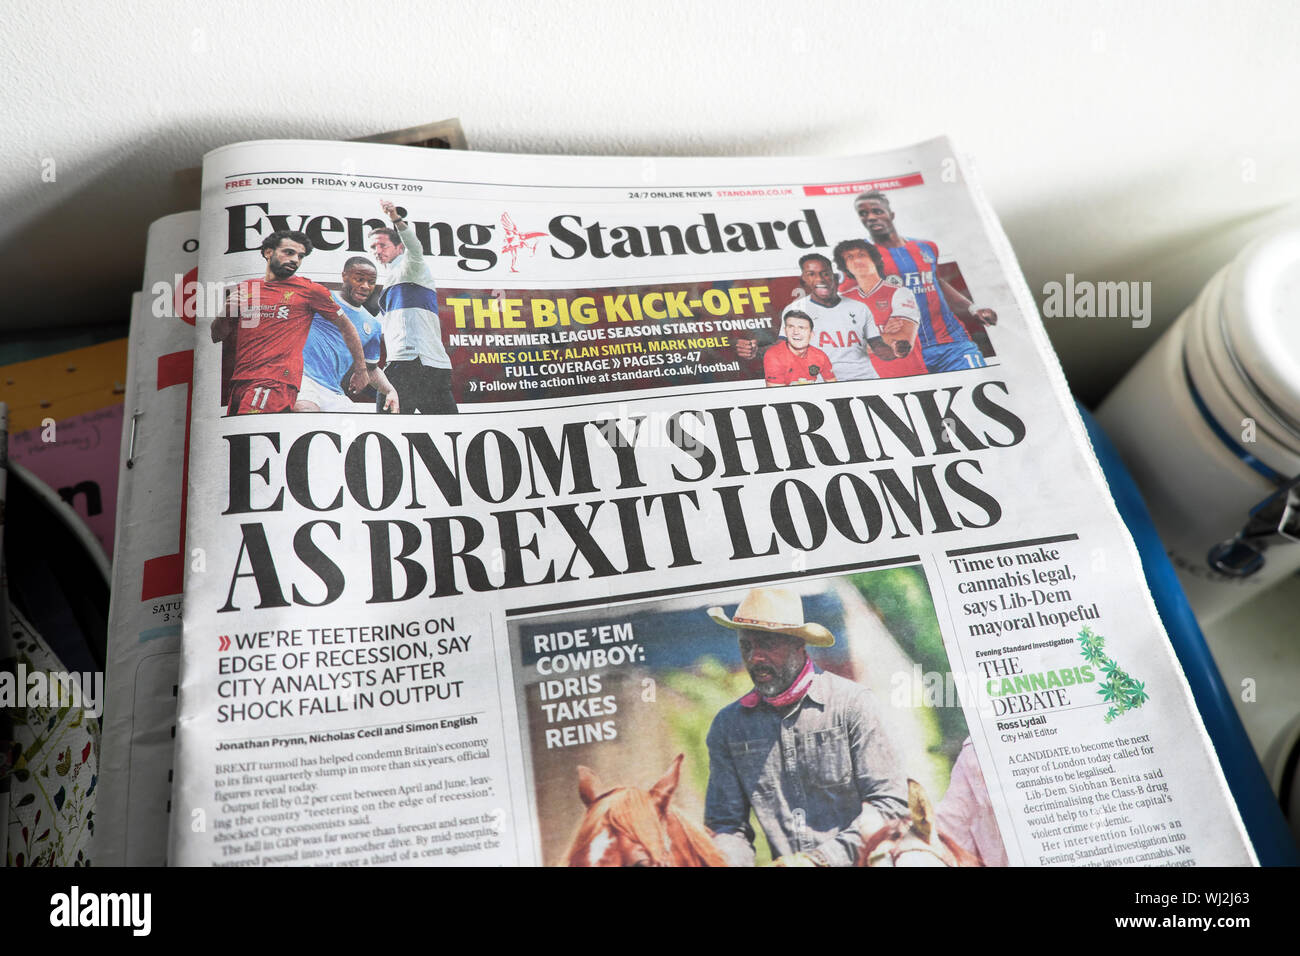 Evening Standard Newspaper Headline On Front Page Economy Shrinks As Brexit Looms 9 August 19 London Uk Stock Photo Alamy